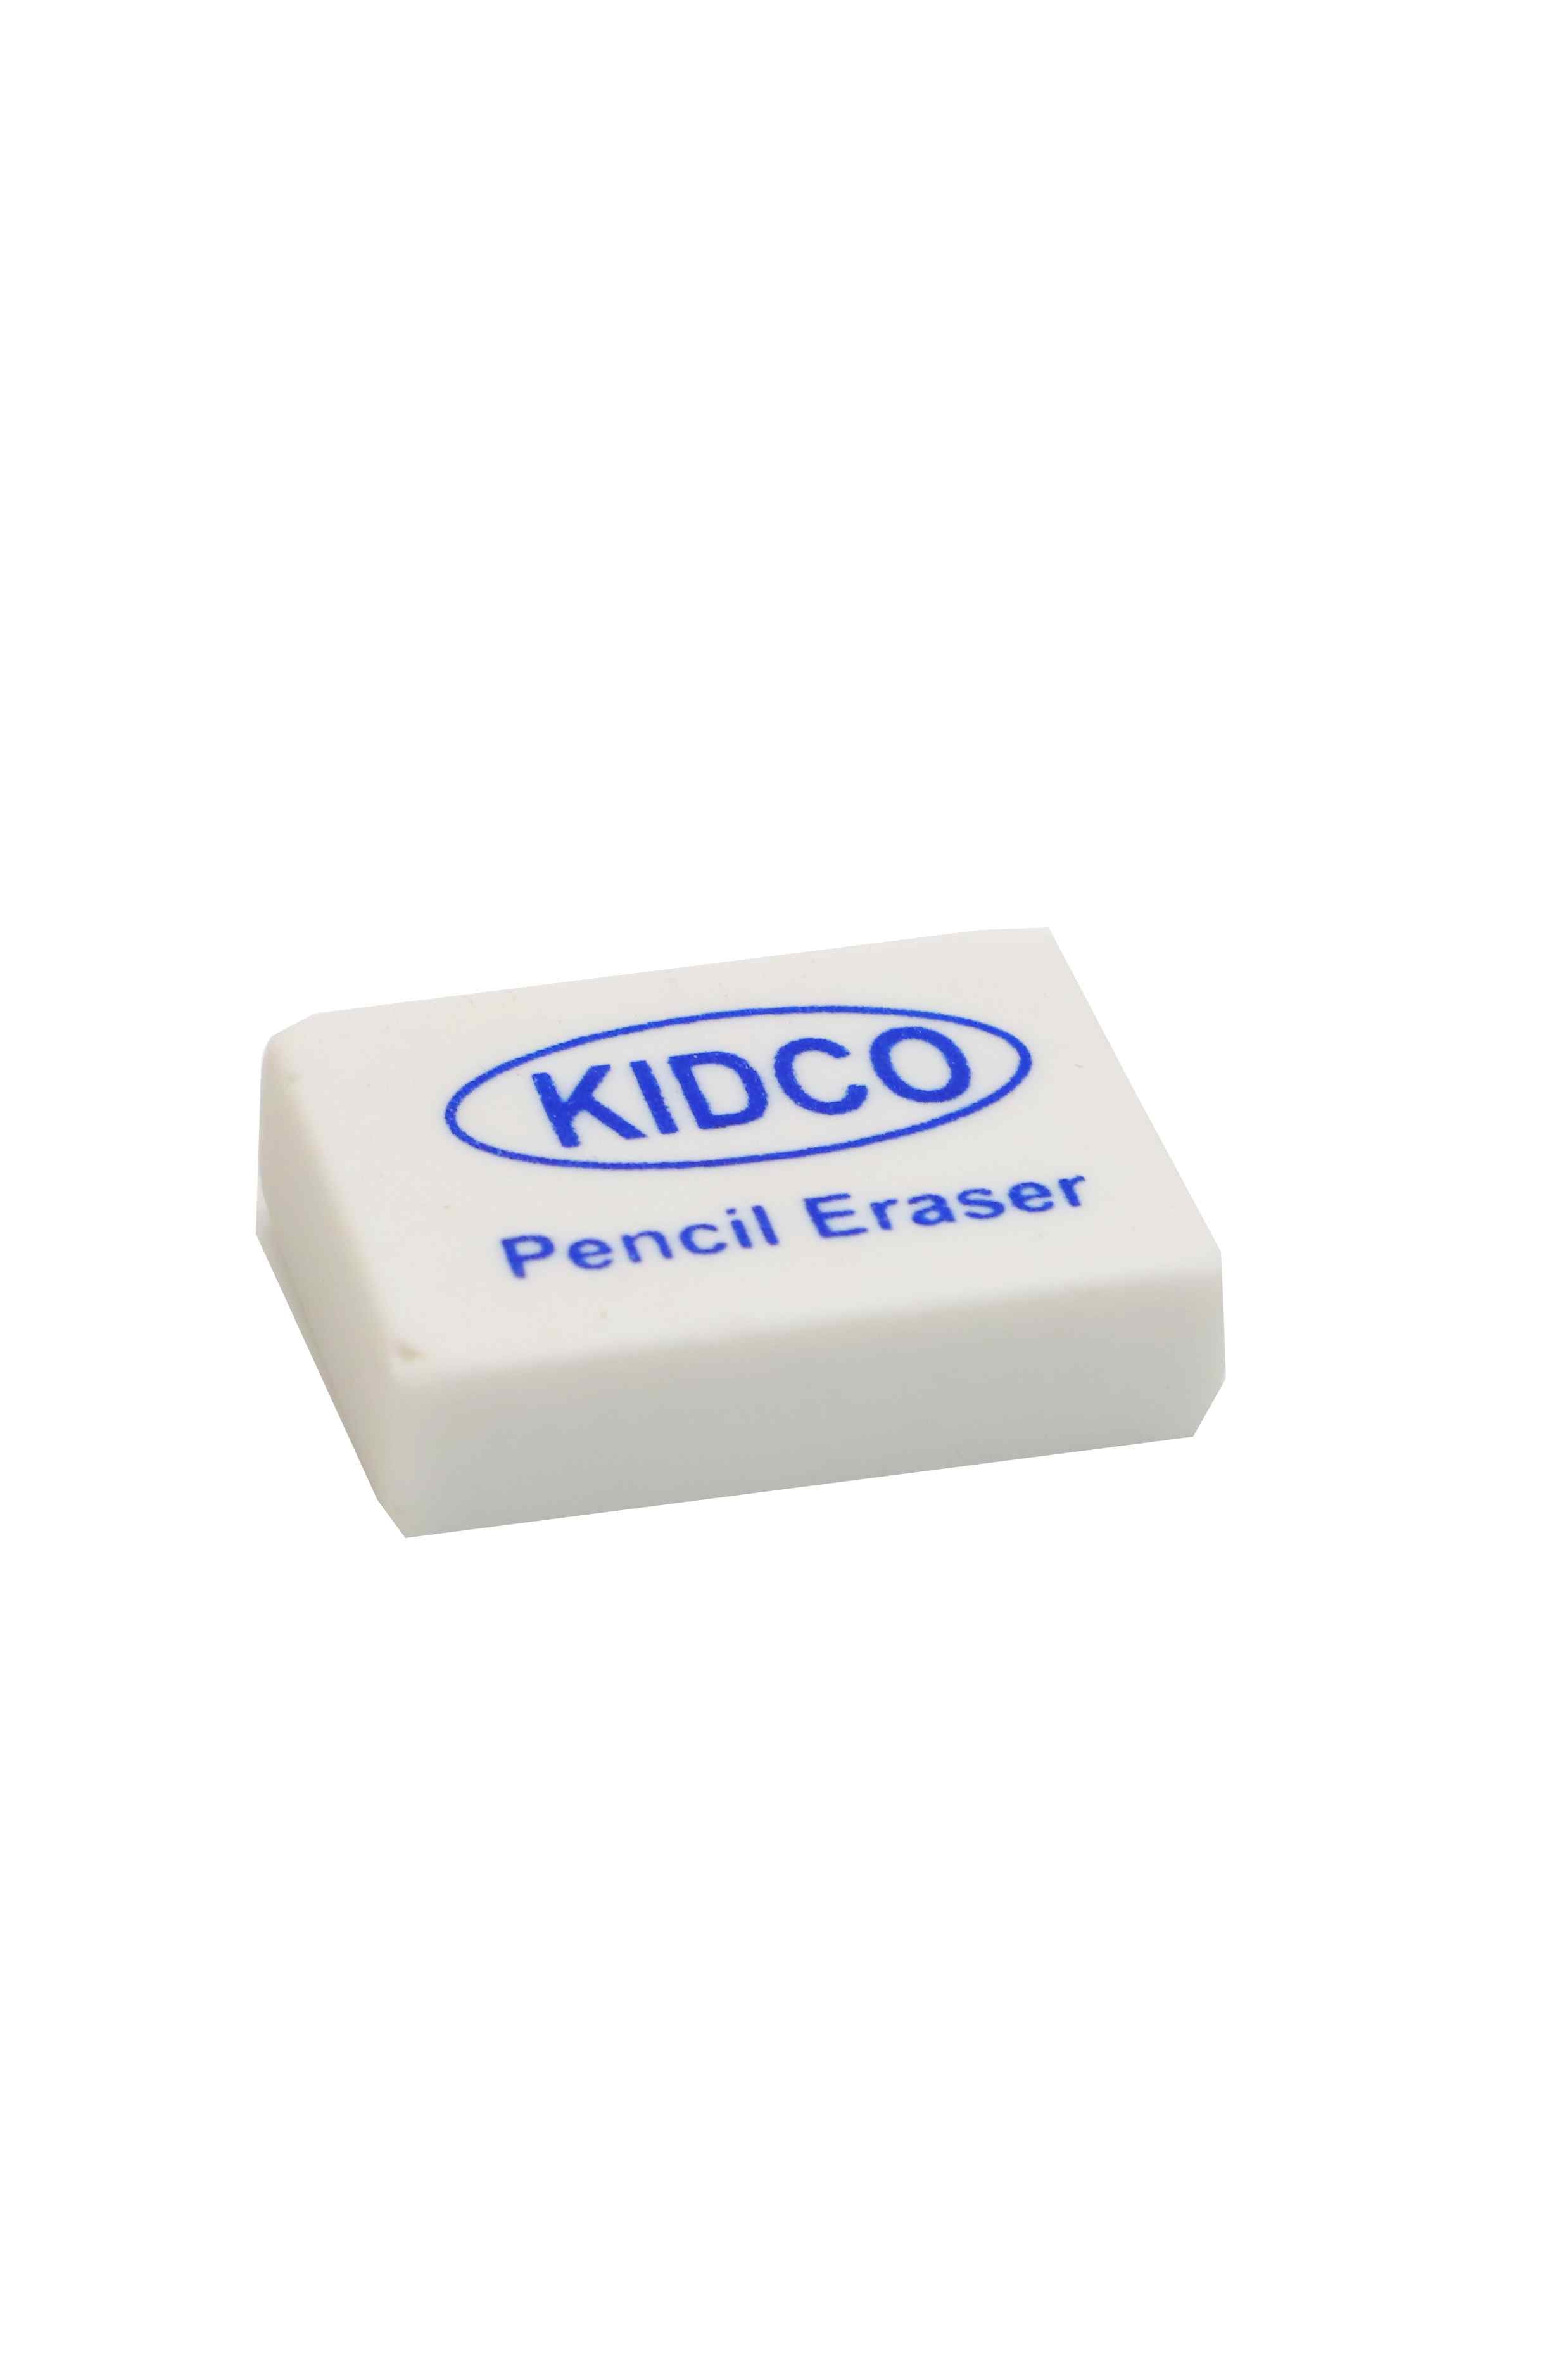 Kidco Pencil Eraser Pack of 12